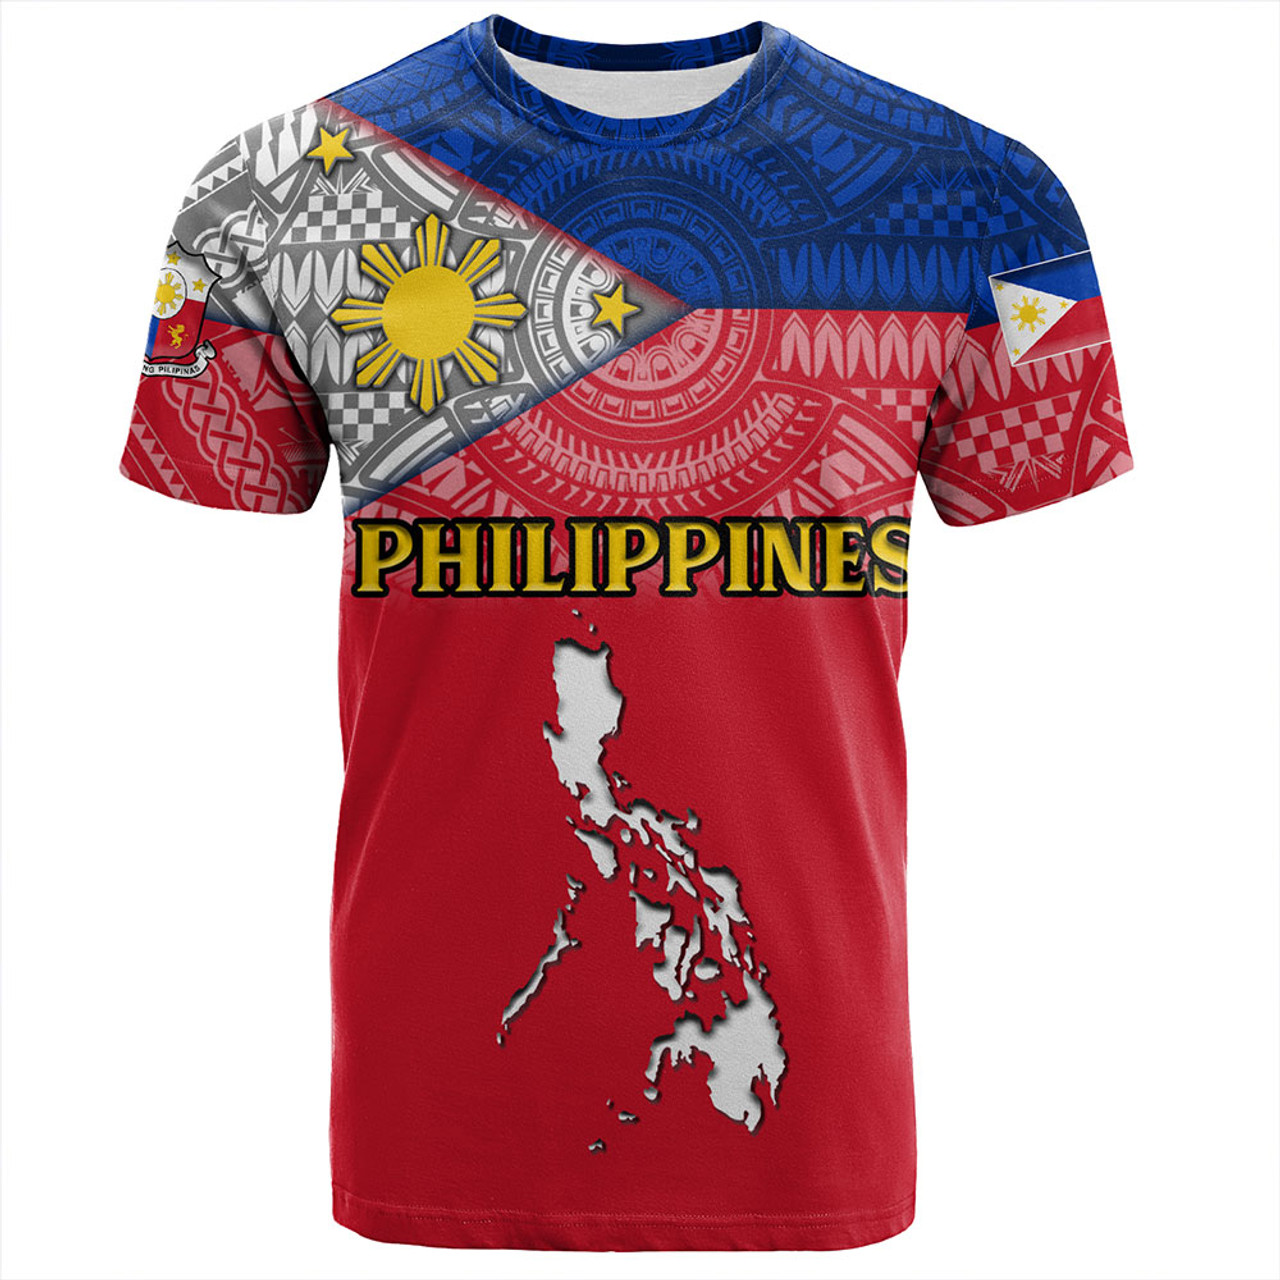 Philippines T-Shirt - Philippines Map And Flag Color Style